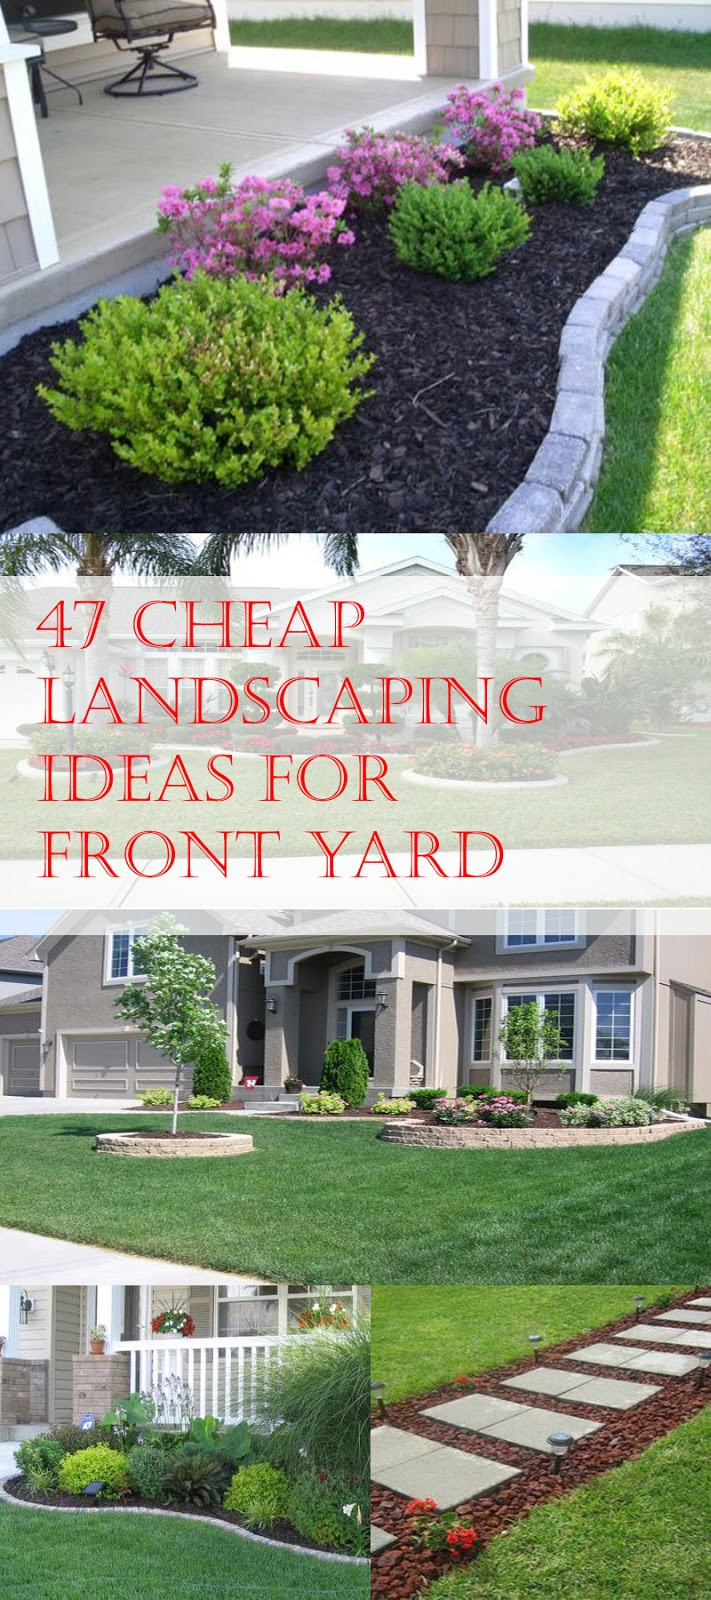 Outdoor Landscape Front
 47 Cheap Landscaping Ideas For Front Yard A Blog on Garden